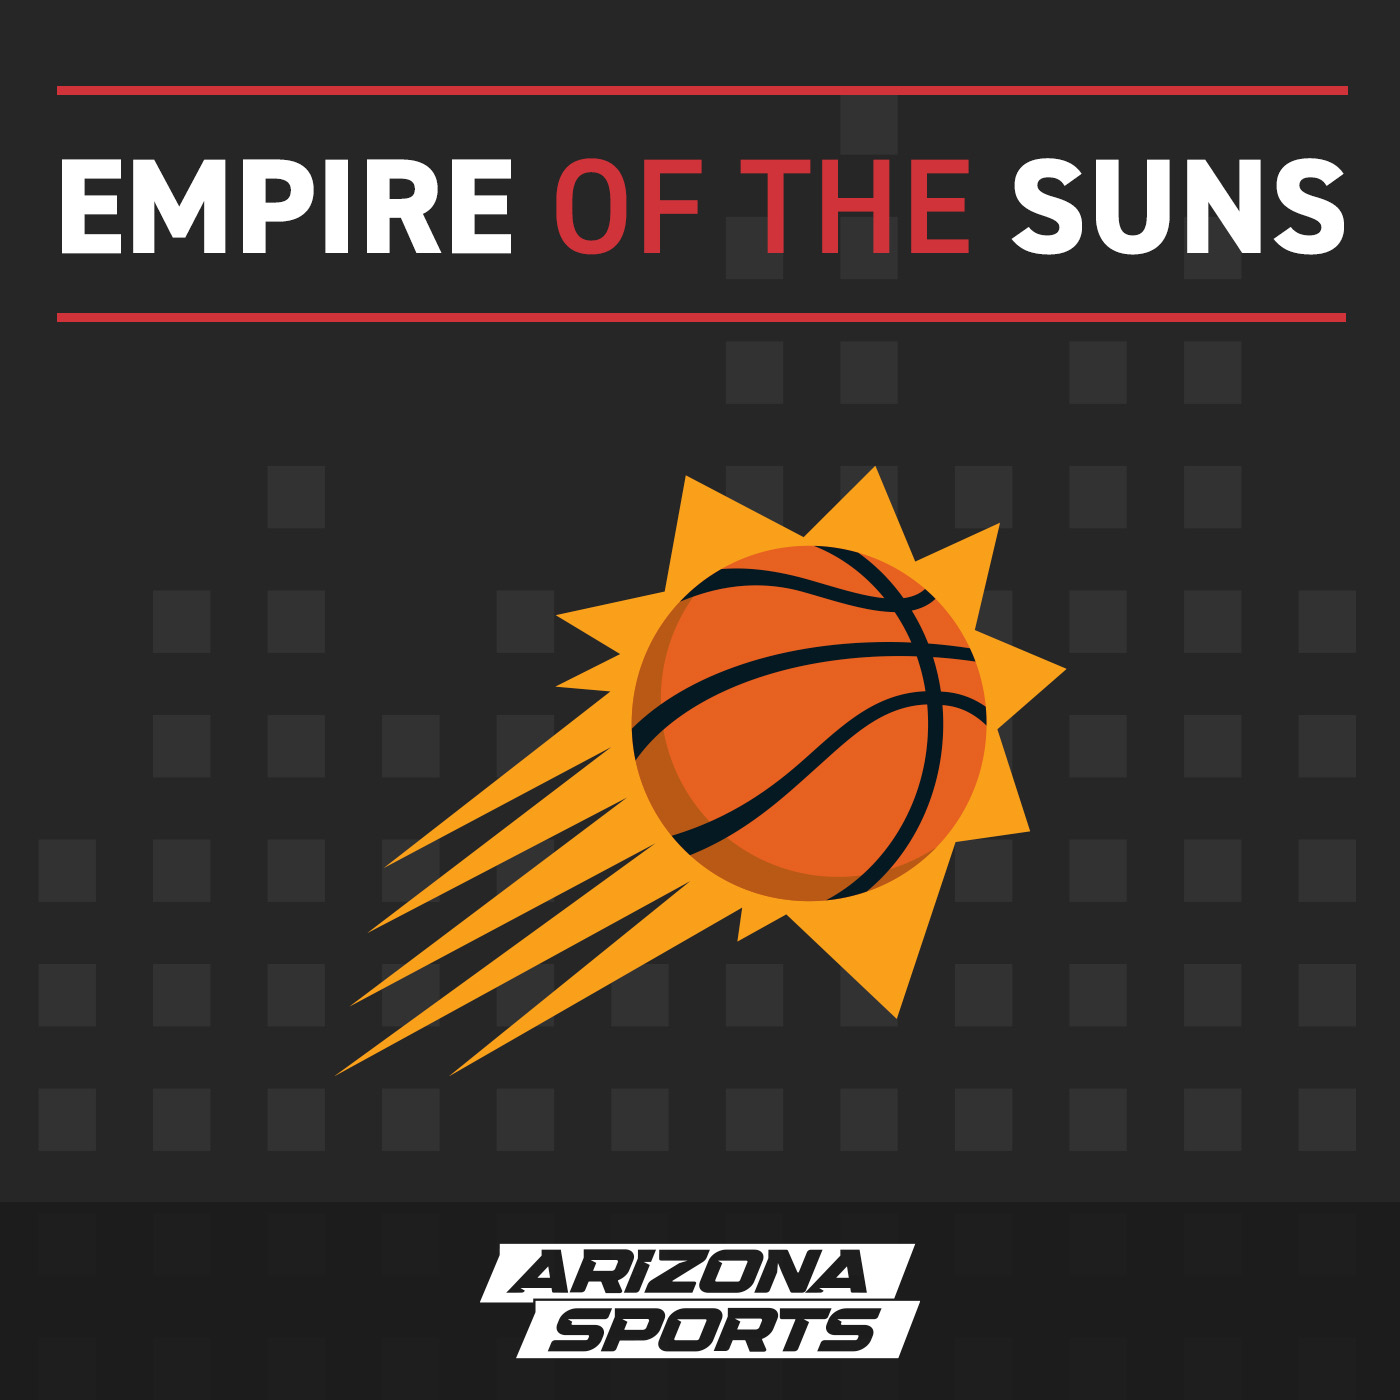 Empire of the Suns live: Suns free agency breakdown part 2 – July 3